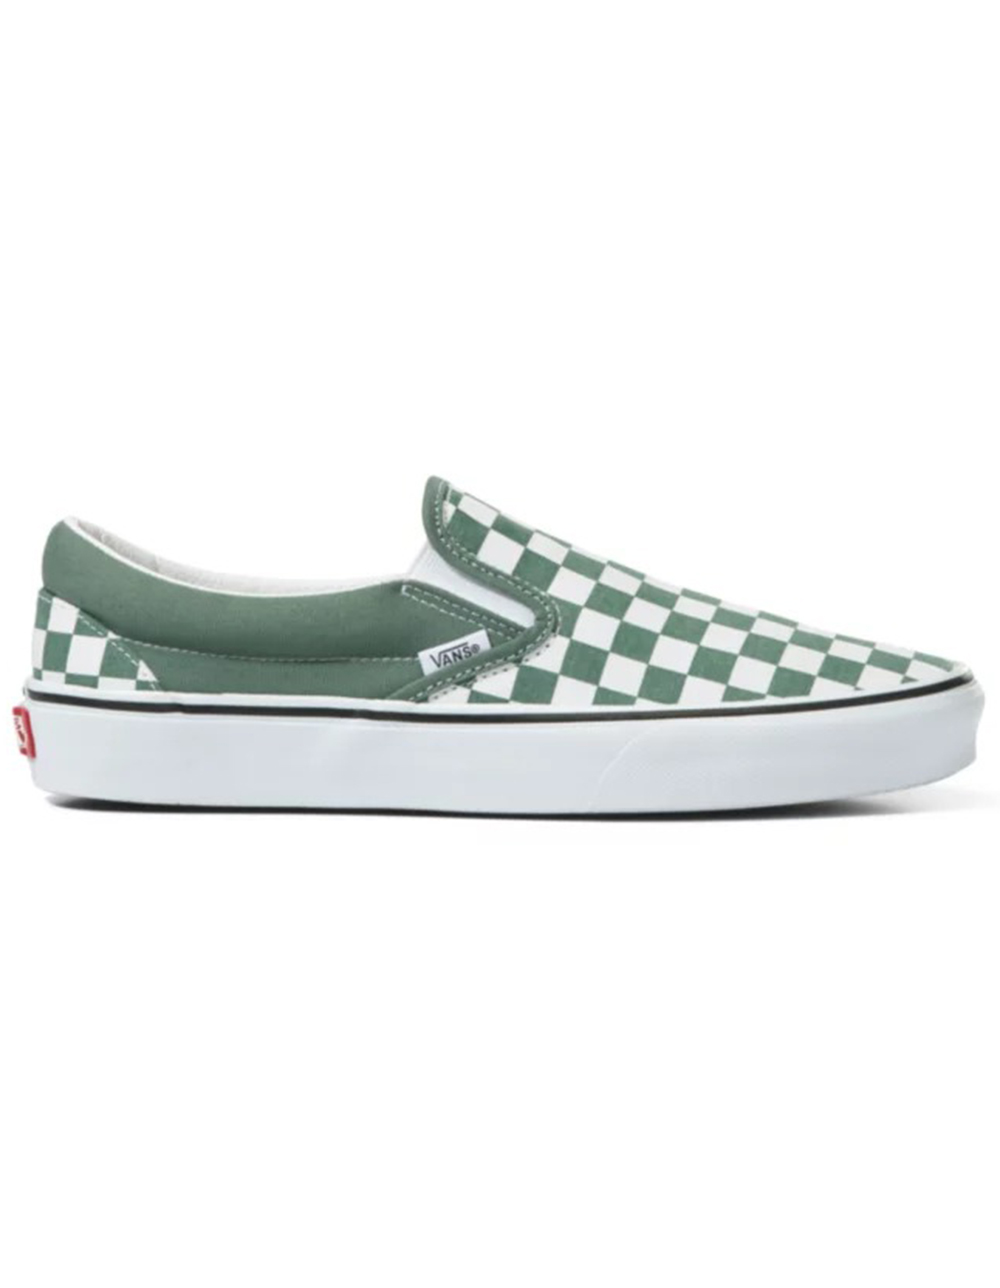 VANS Color Theory Classic Slip-On Shoes - GREEN/WHITE | Tillys